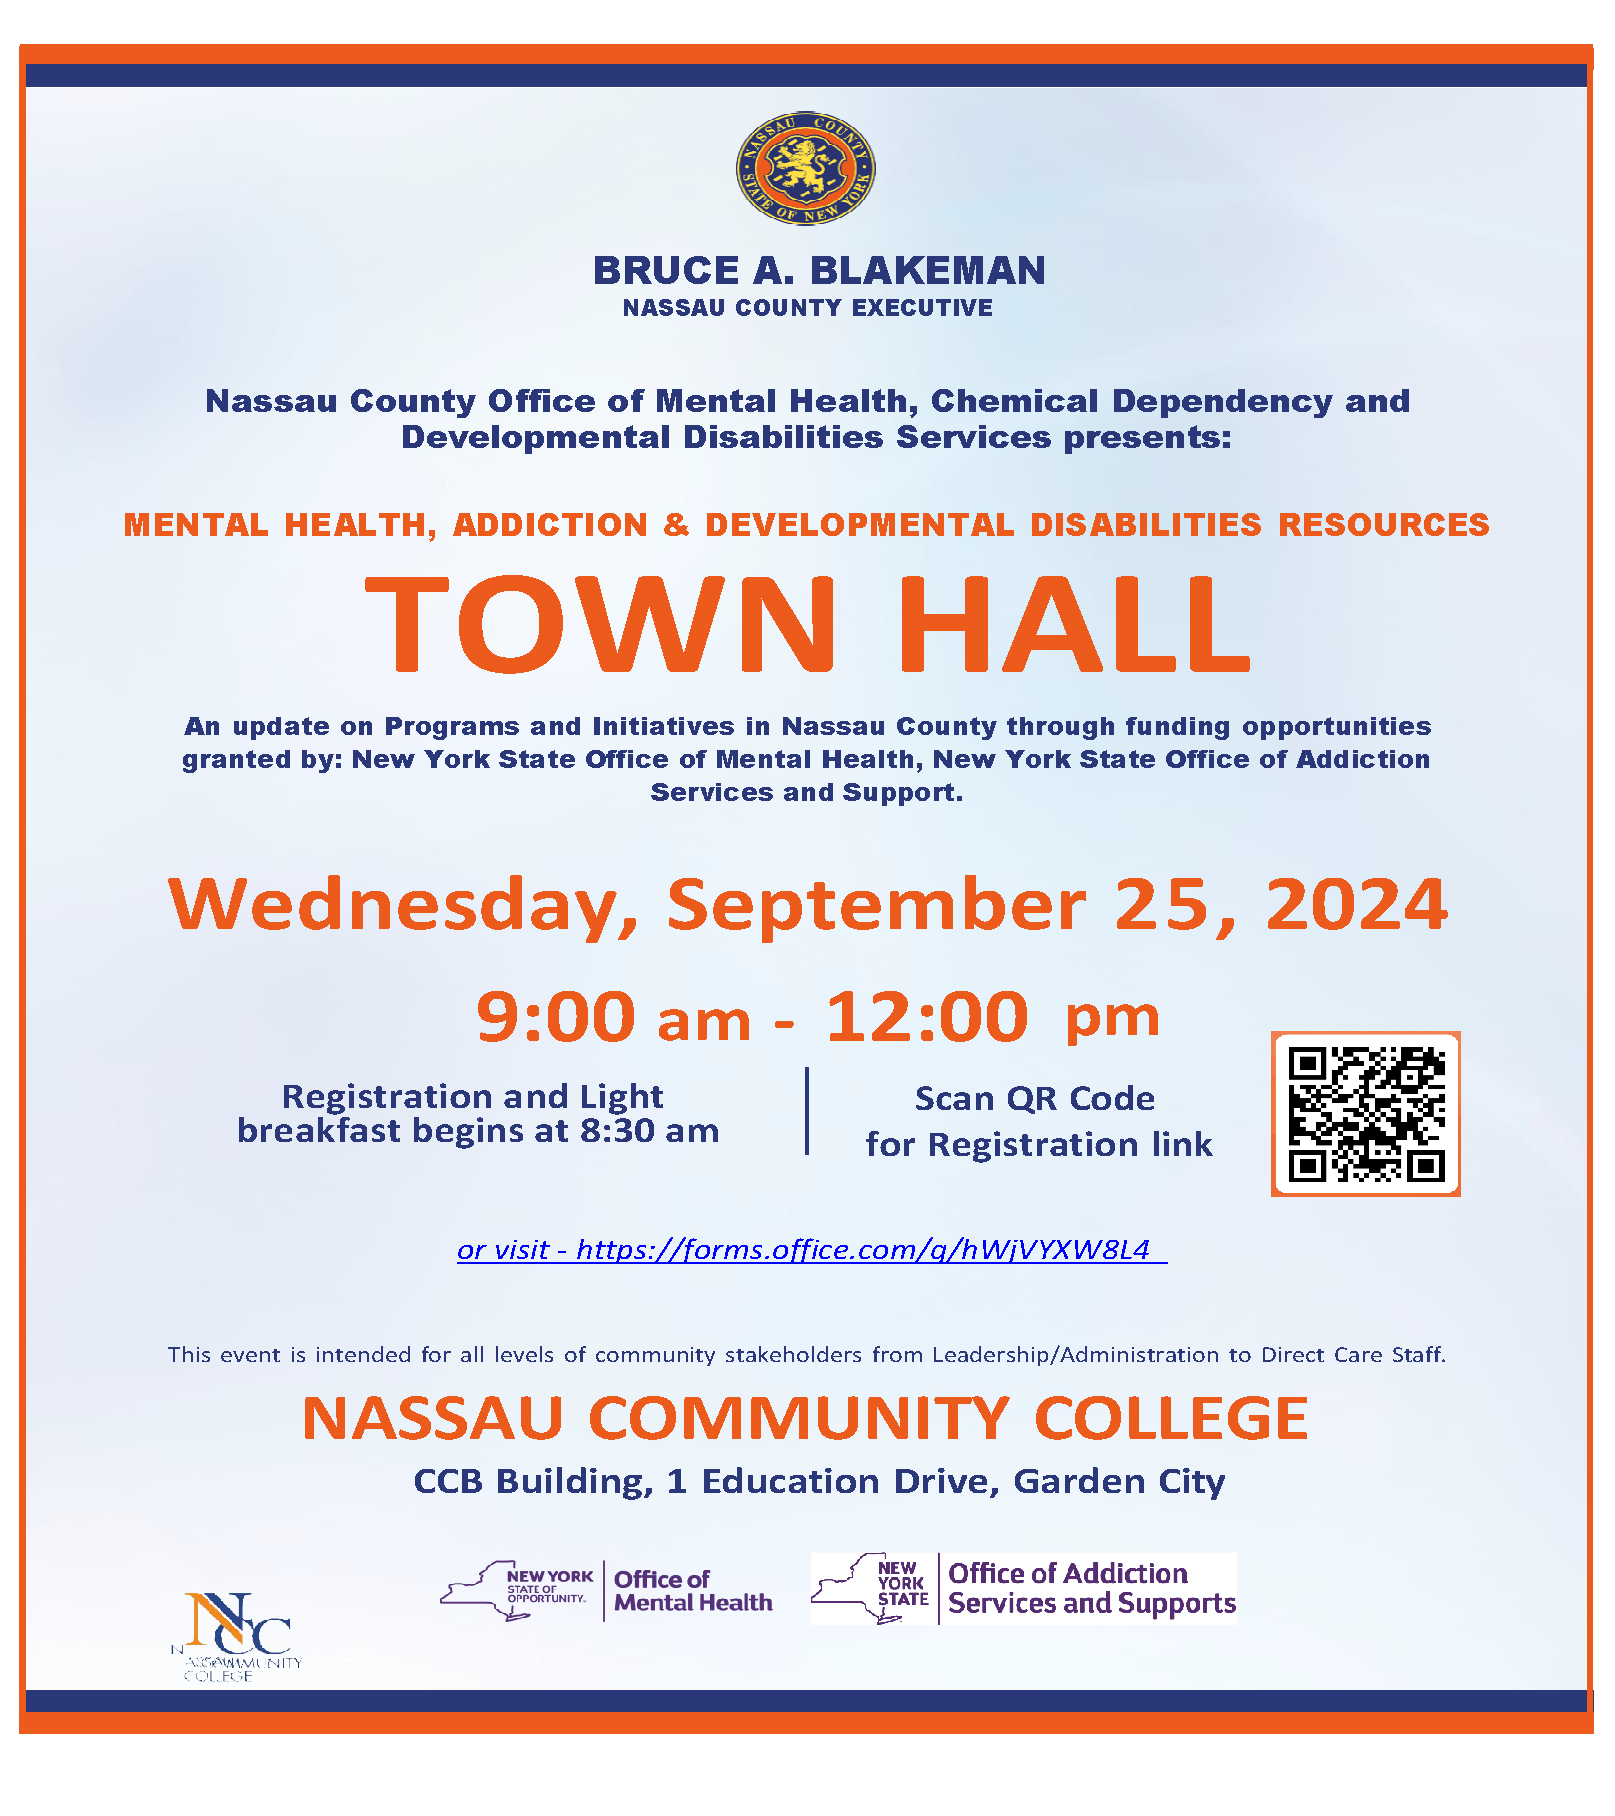 MENTAL HEALTH, ADDICTION & DEVELOPMENTAL DISABILITIES RESOURCES TOWN HALL 9/25/24 at NCC